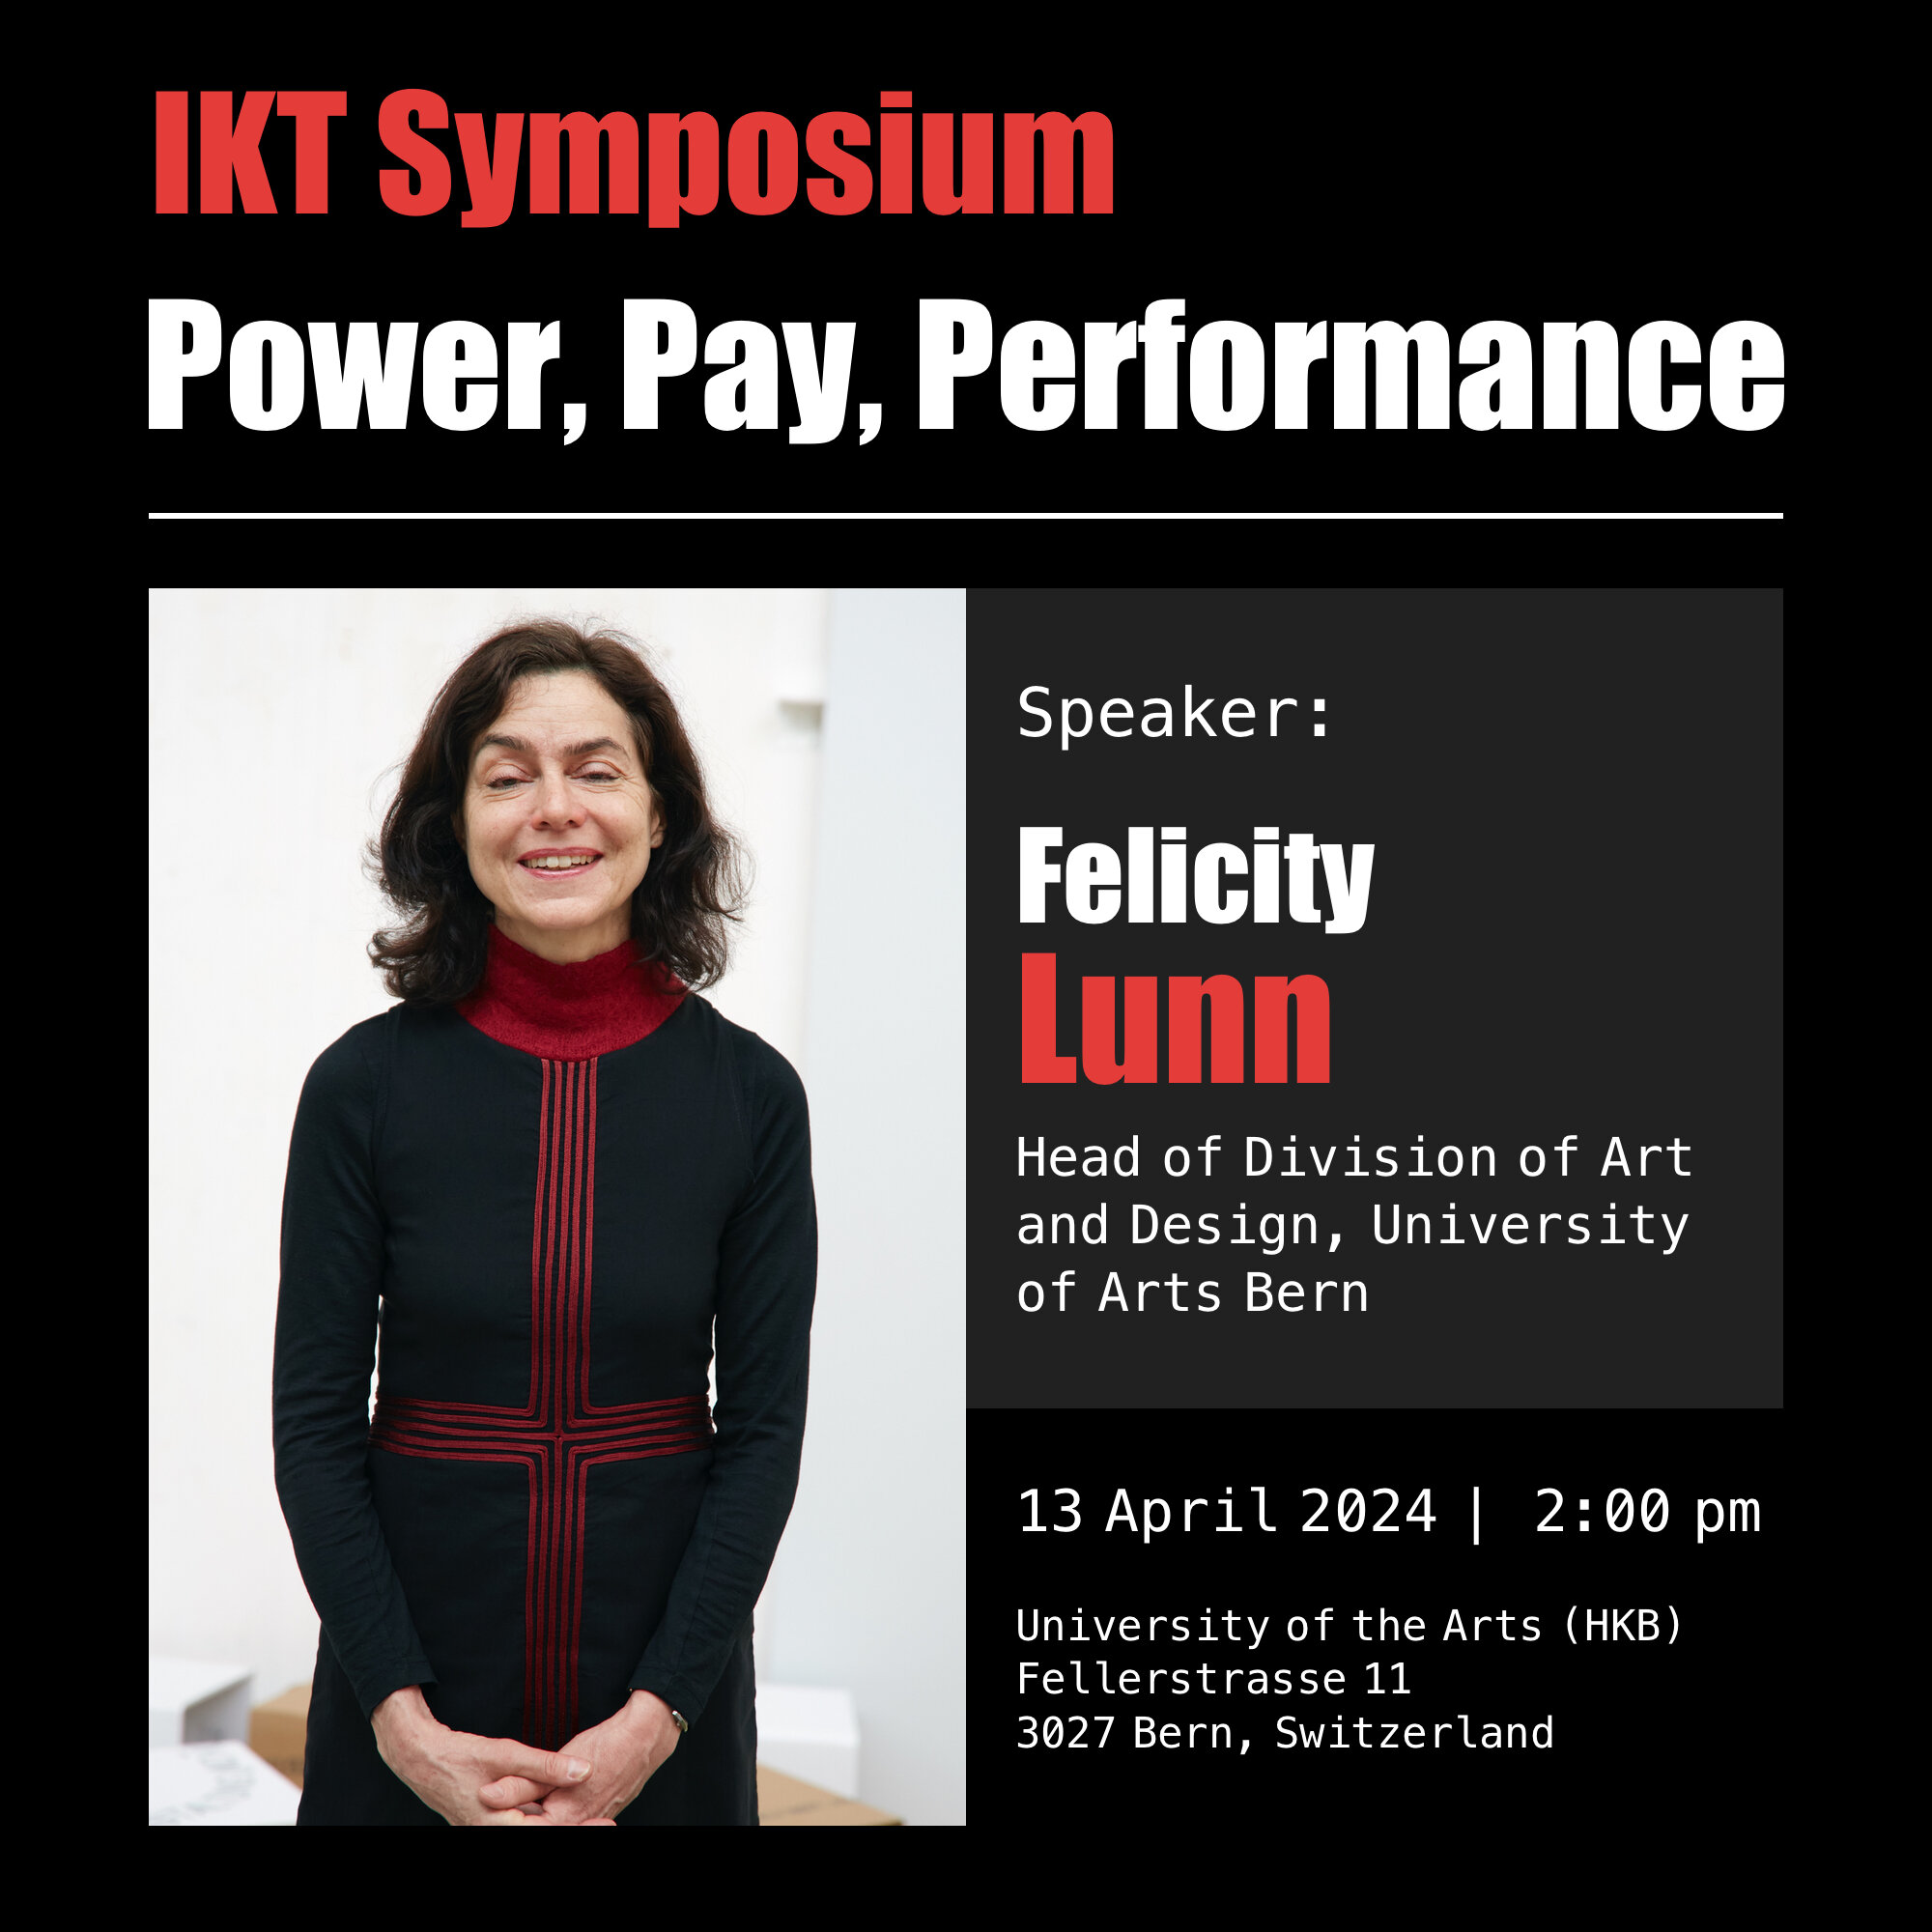 Meet IKT Symposium Speaker: Felicity Lunn @lunnfelicity 

Join us at the IKT Symposium 2024 on April 13th at 2:00 pm to hear from Felicity Lunn. Formerly curator at  Whitechapel Gallery in London and director of Kunstverein Freiburg in Germany, Felic